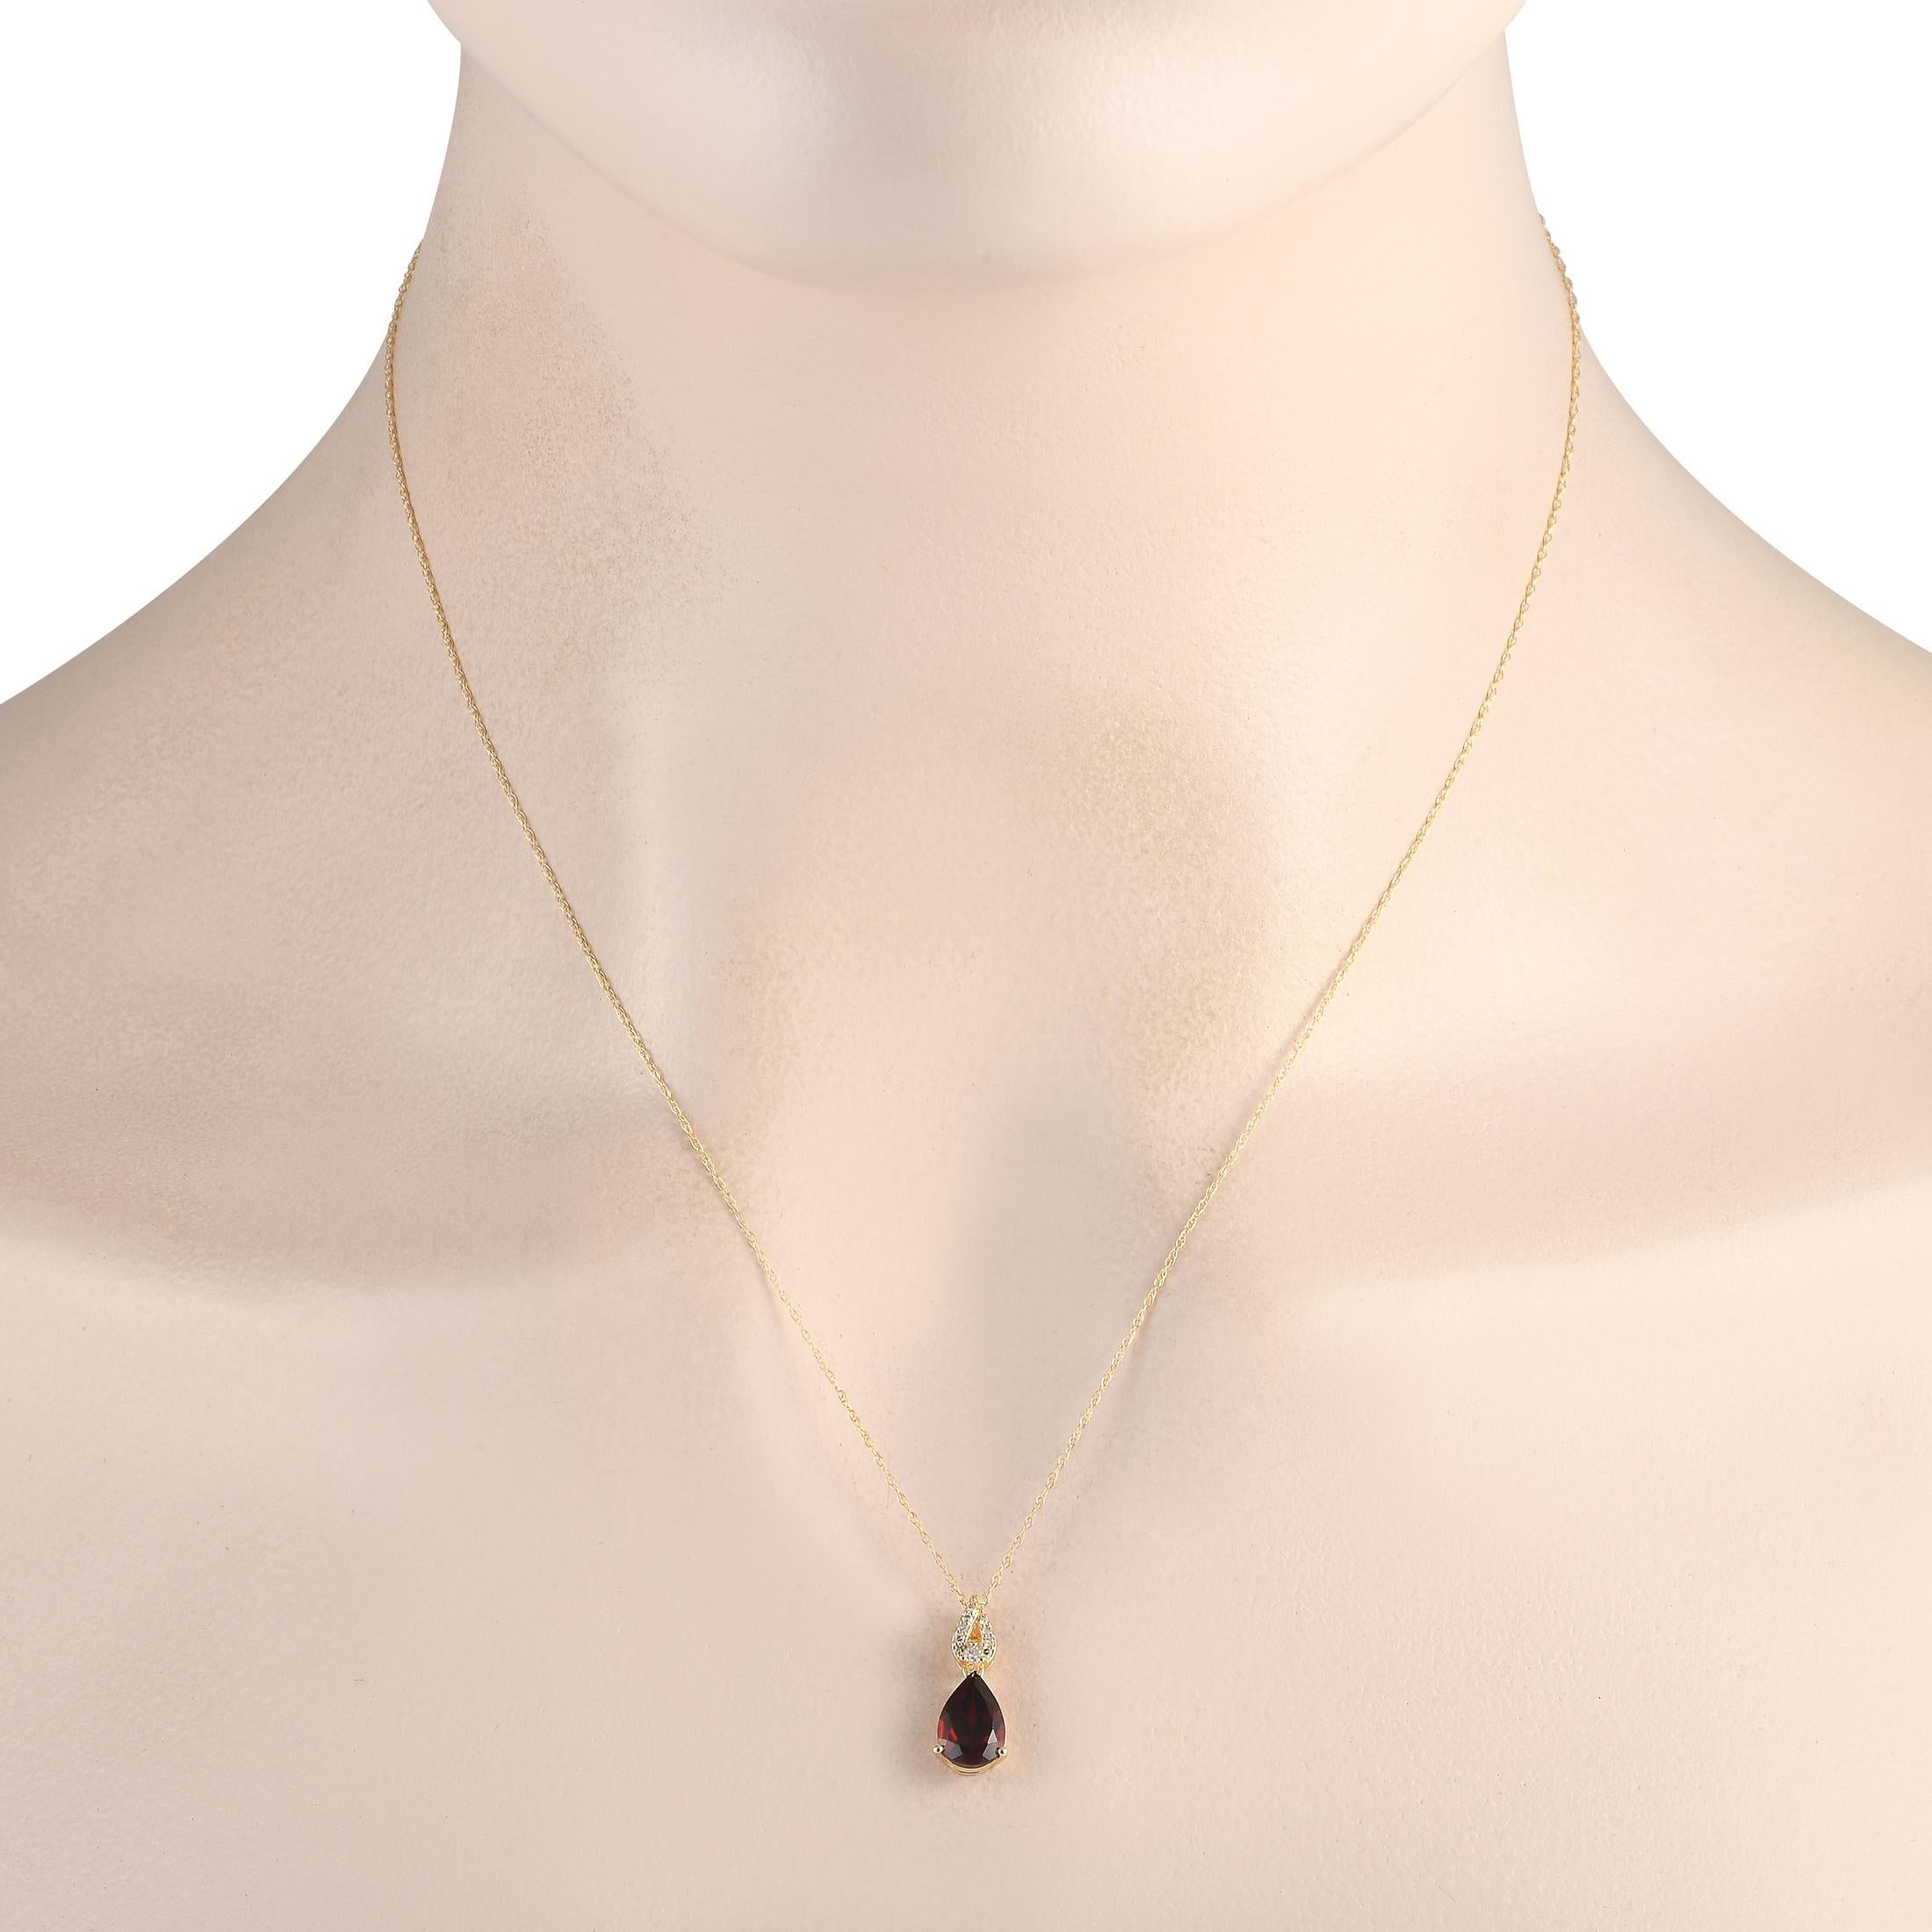 Add a touch of luxury to any occasion with this exquisite necklace. Sleek and simple, the 14K Yellow Gold pendant beautifully showcases Diamond accents totaling 0.06 carats and a deep red pear-shaped Garnet gemstone. The pendant measures 0.65 long